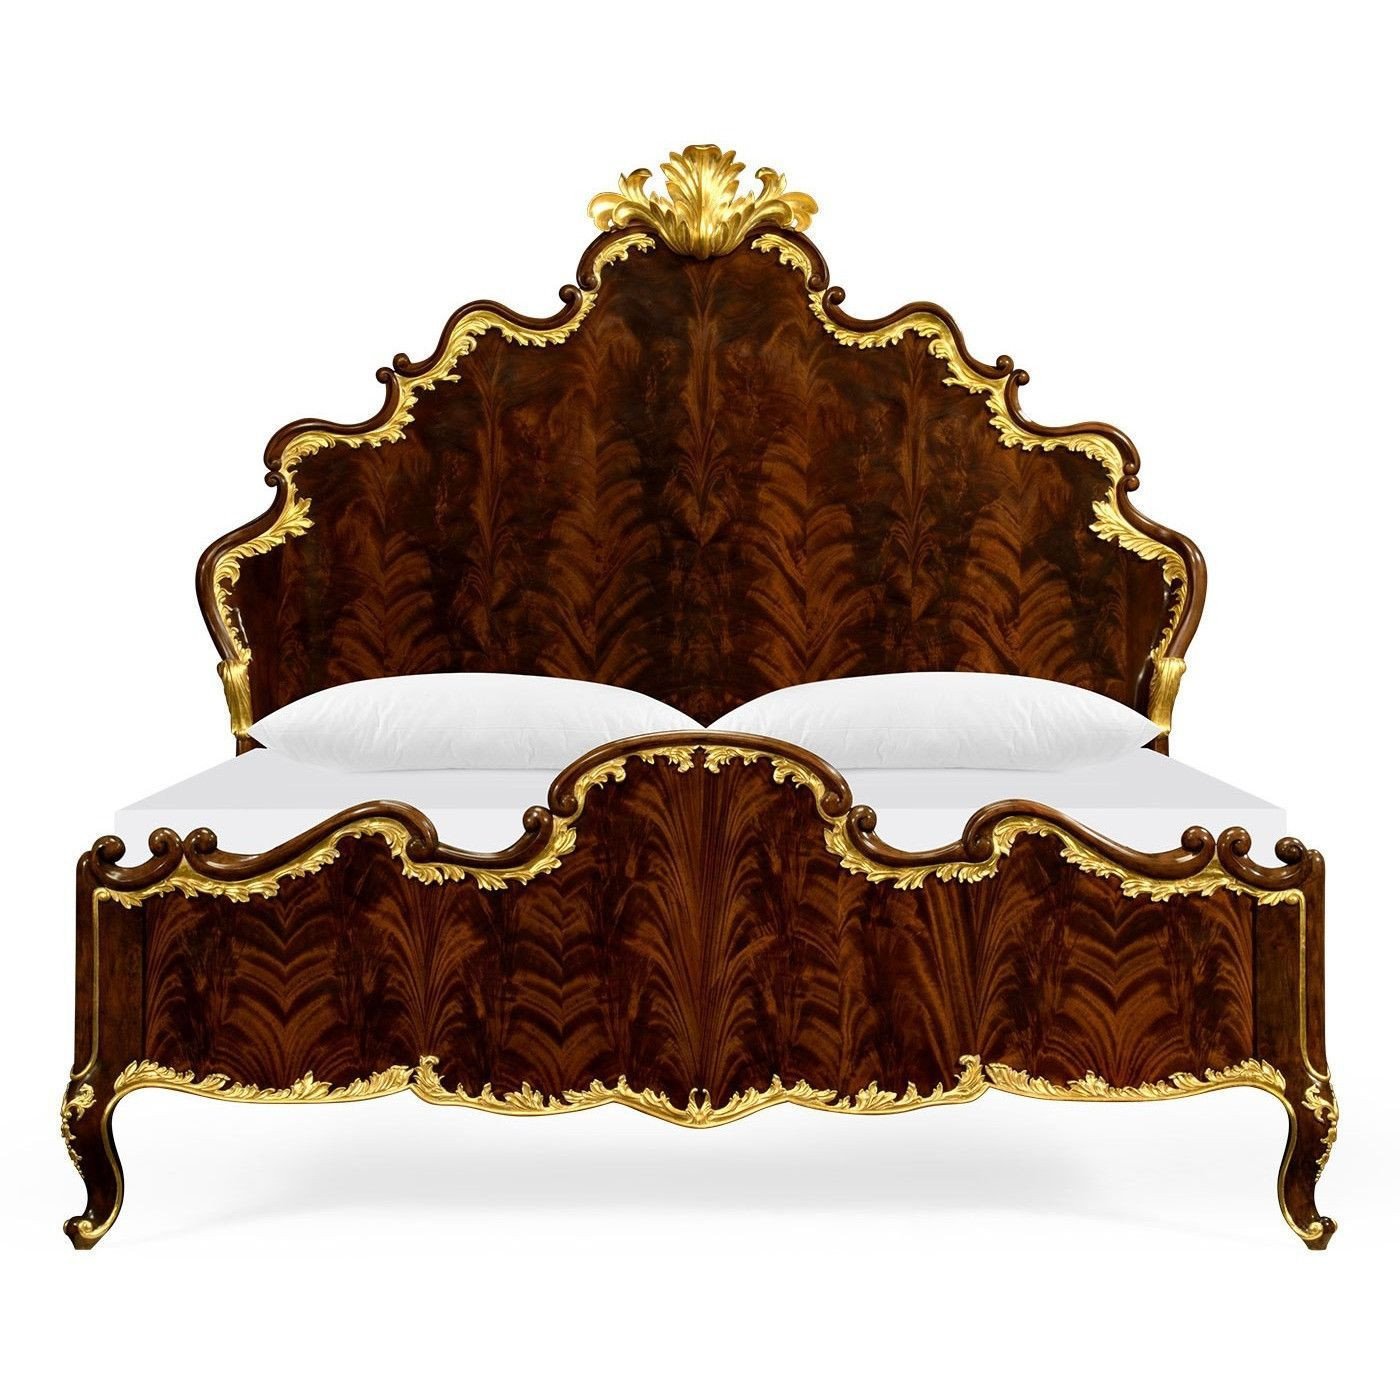 Monte Carlo Bedroom Set Fresh Jonathan Charles Monte Carlo Us King Bed with Gilt Carved